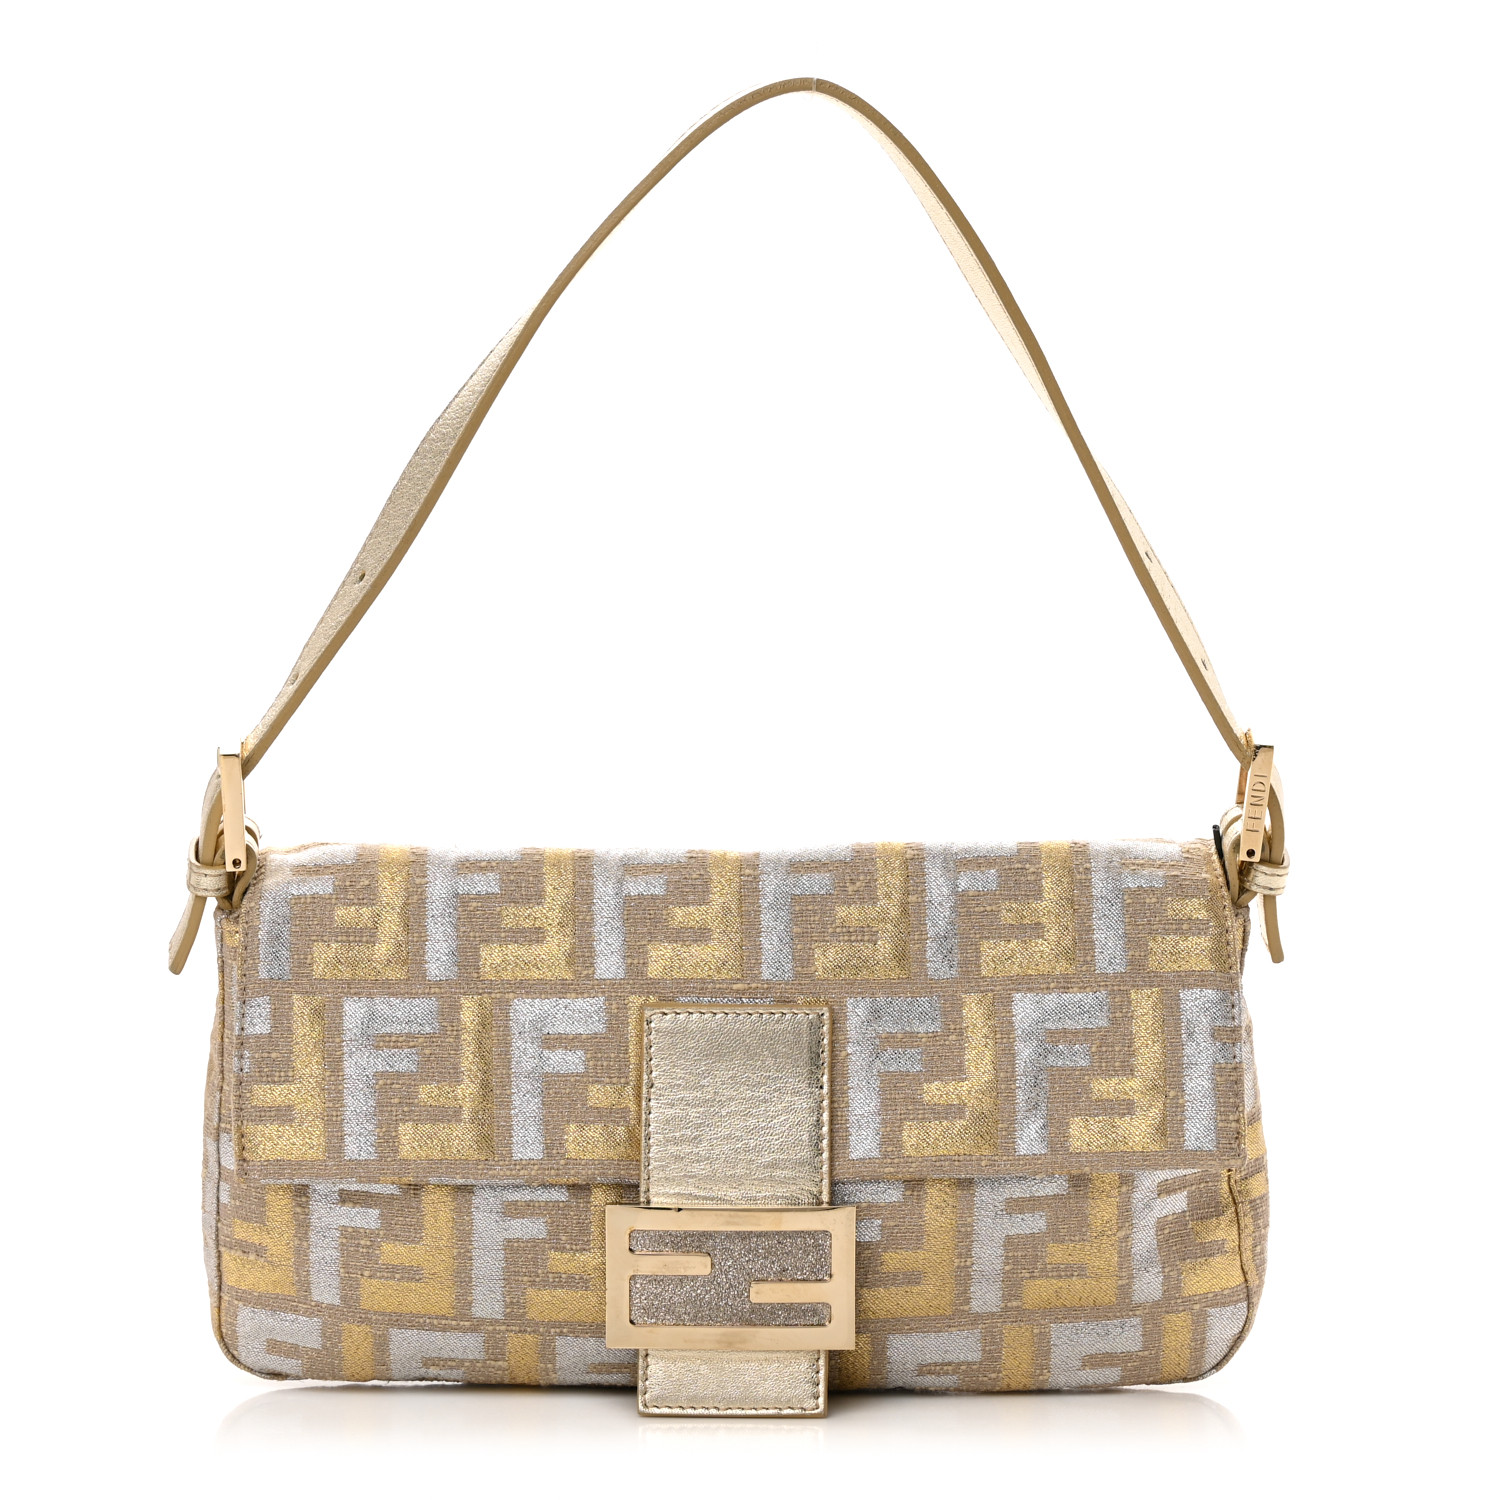 image of FENDI Metallic Lurex Zucca Baguette in the colors Gold and Silver by FASHIONPHILE